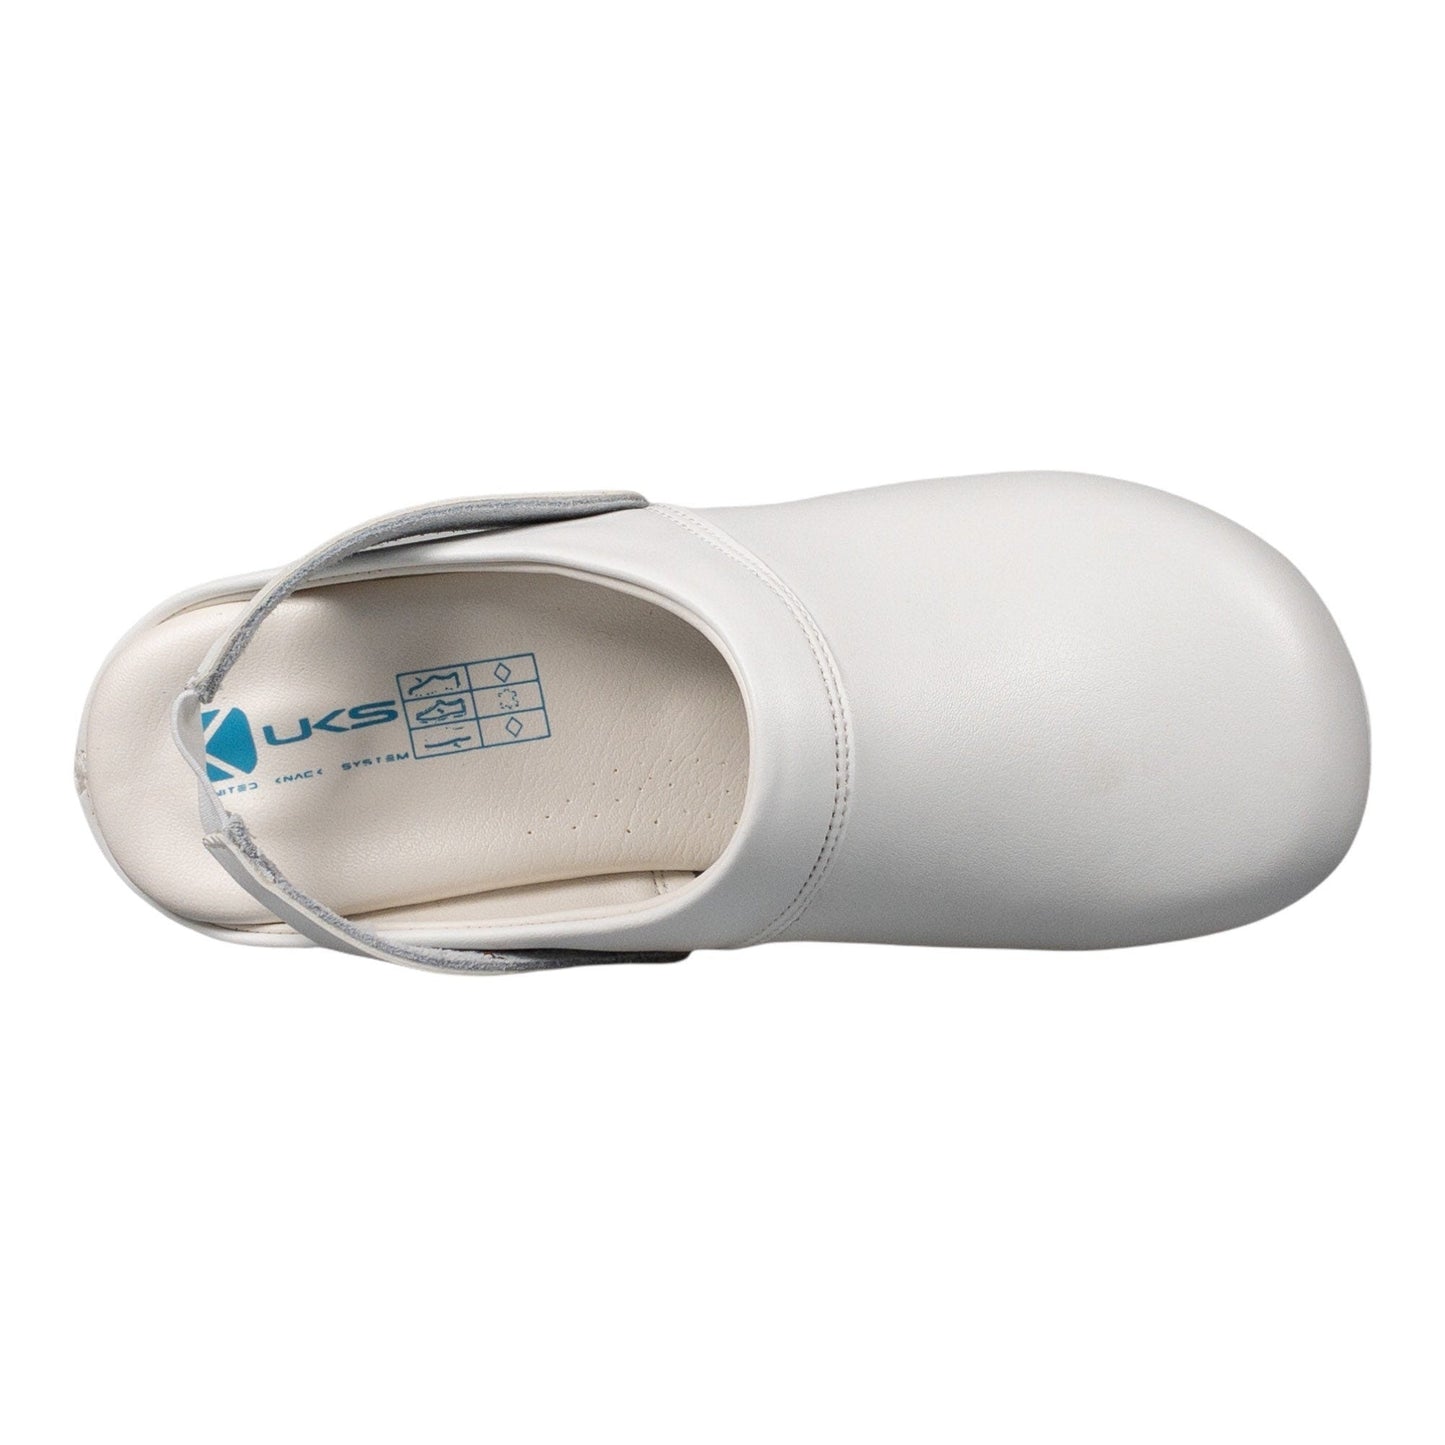 White Back Band Air Clogx Leather Clogs Slippers